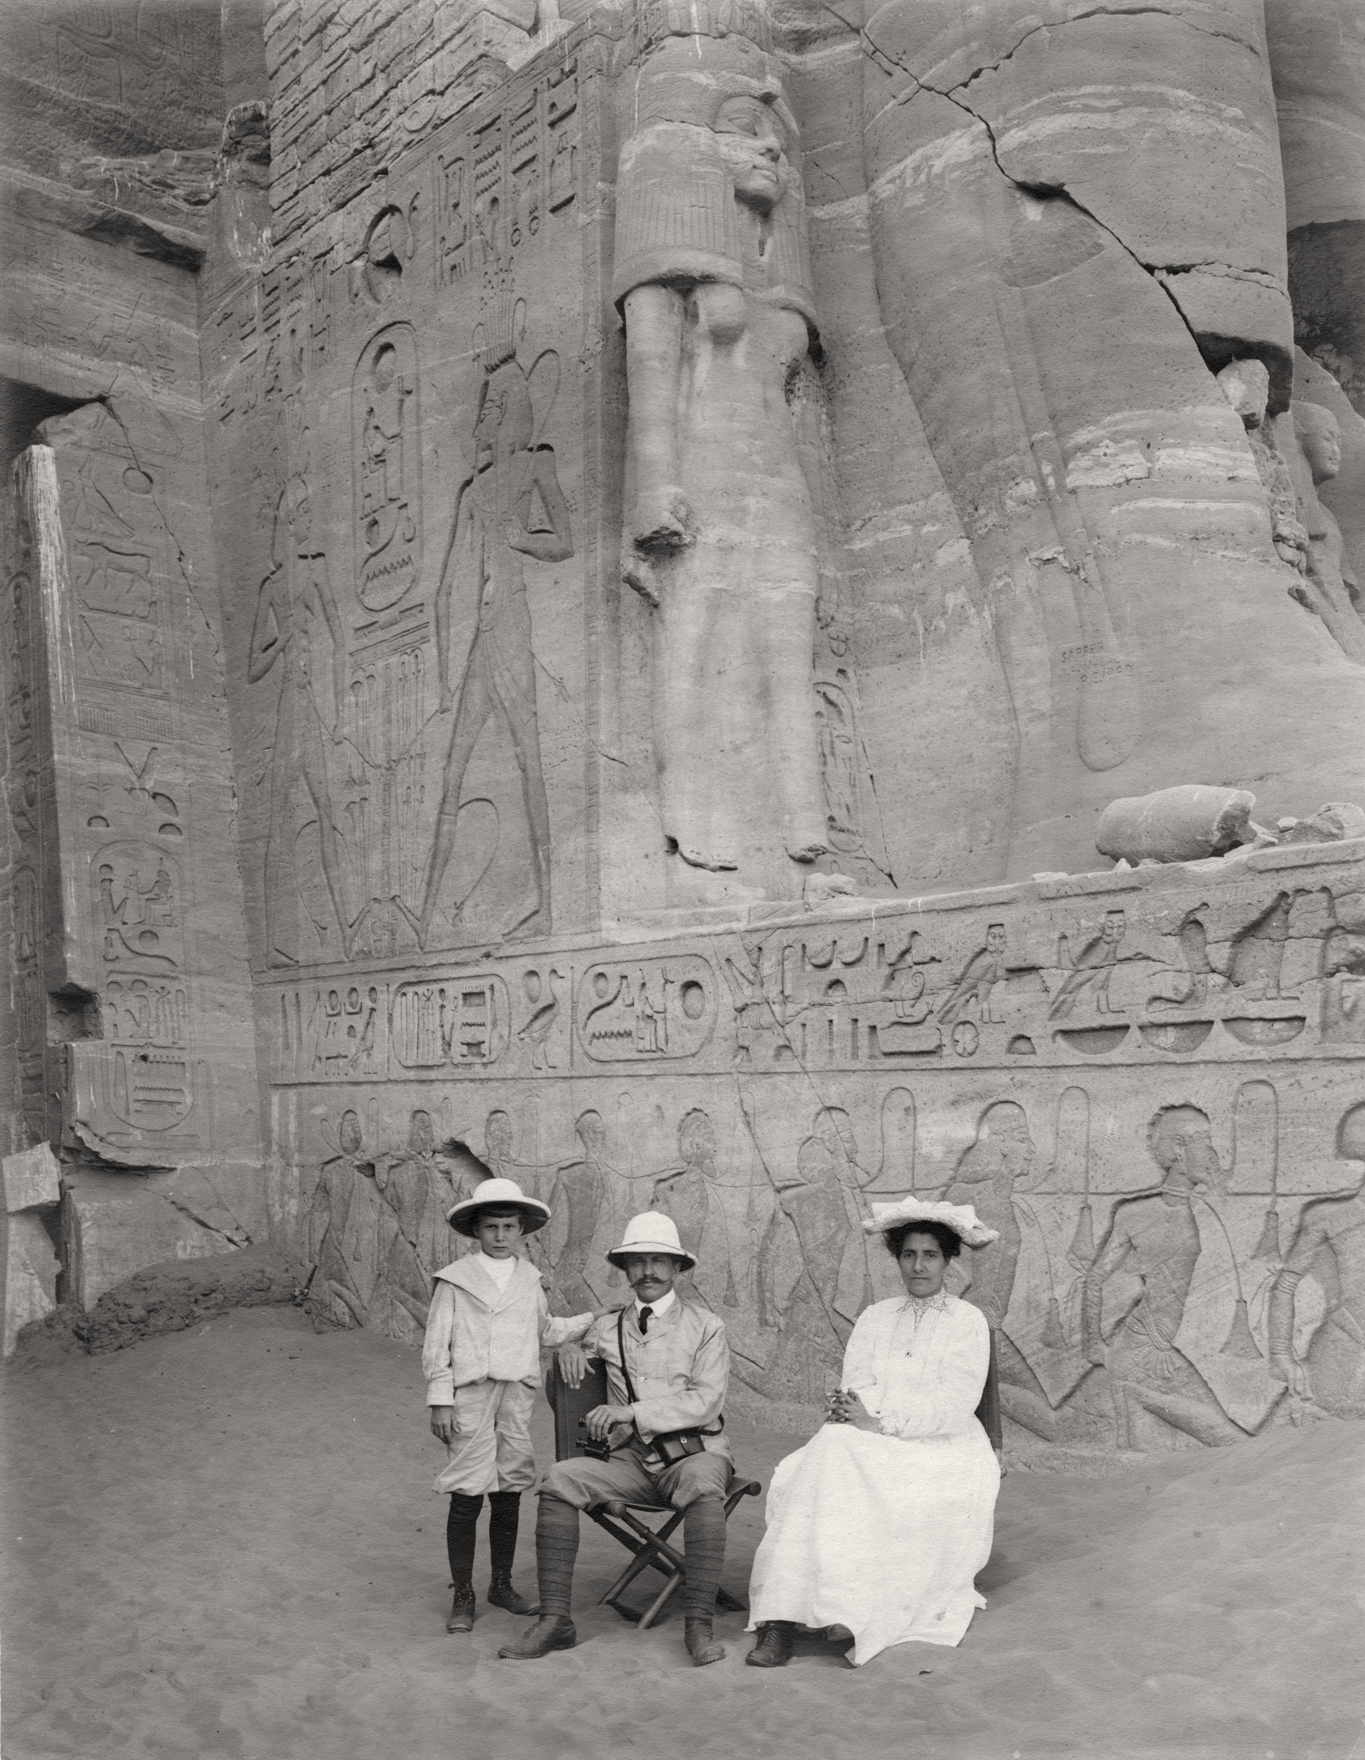 OI founder James Henry Breasted and his family at Abu Simbel in 1906.